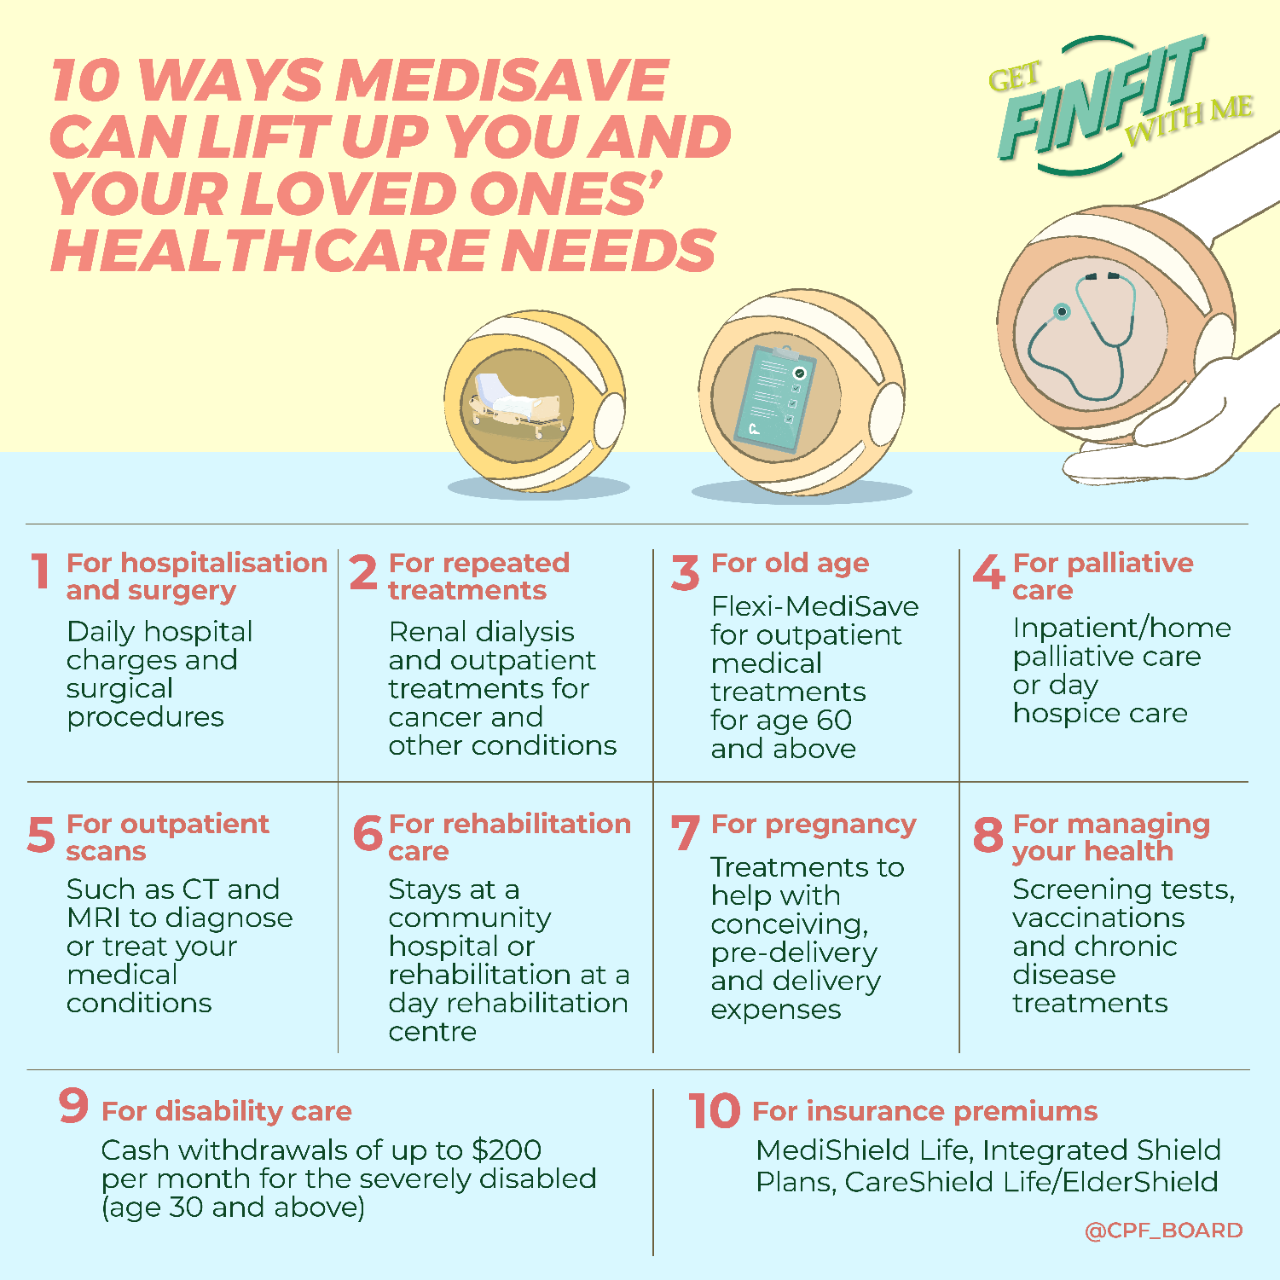 A list of 10 ways MediSave can lift up you and your loved ones’ healthcare needs.